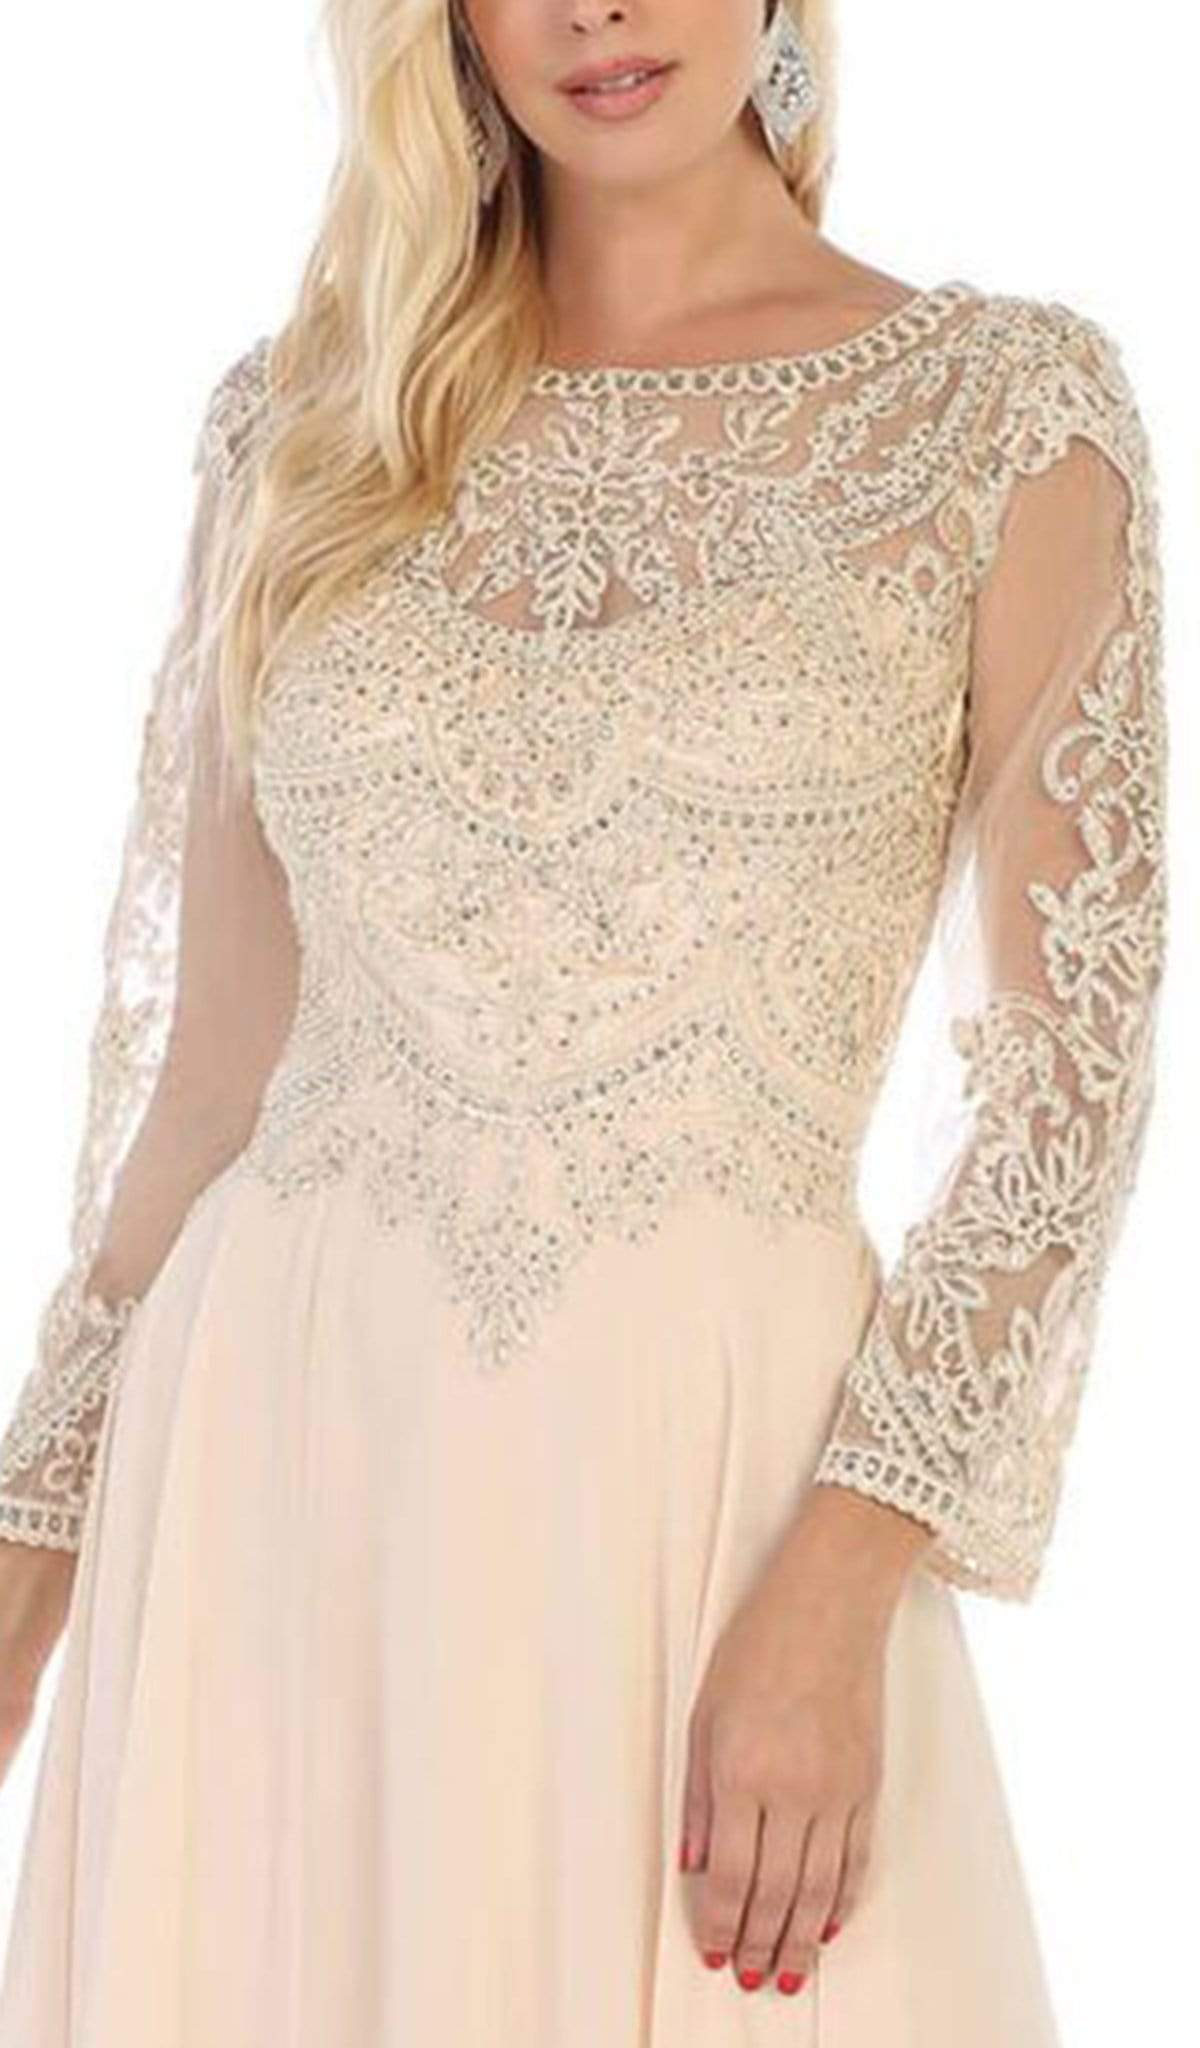 May Queen - MQ1615B Applique Long Sleeve A-line Dress In Nude